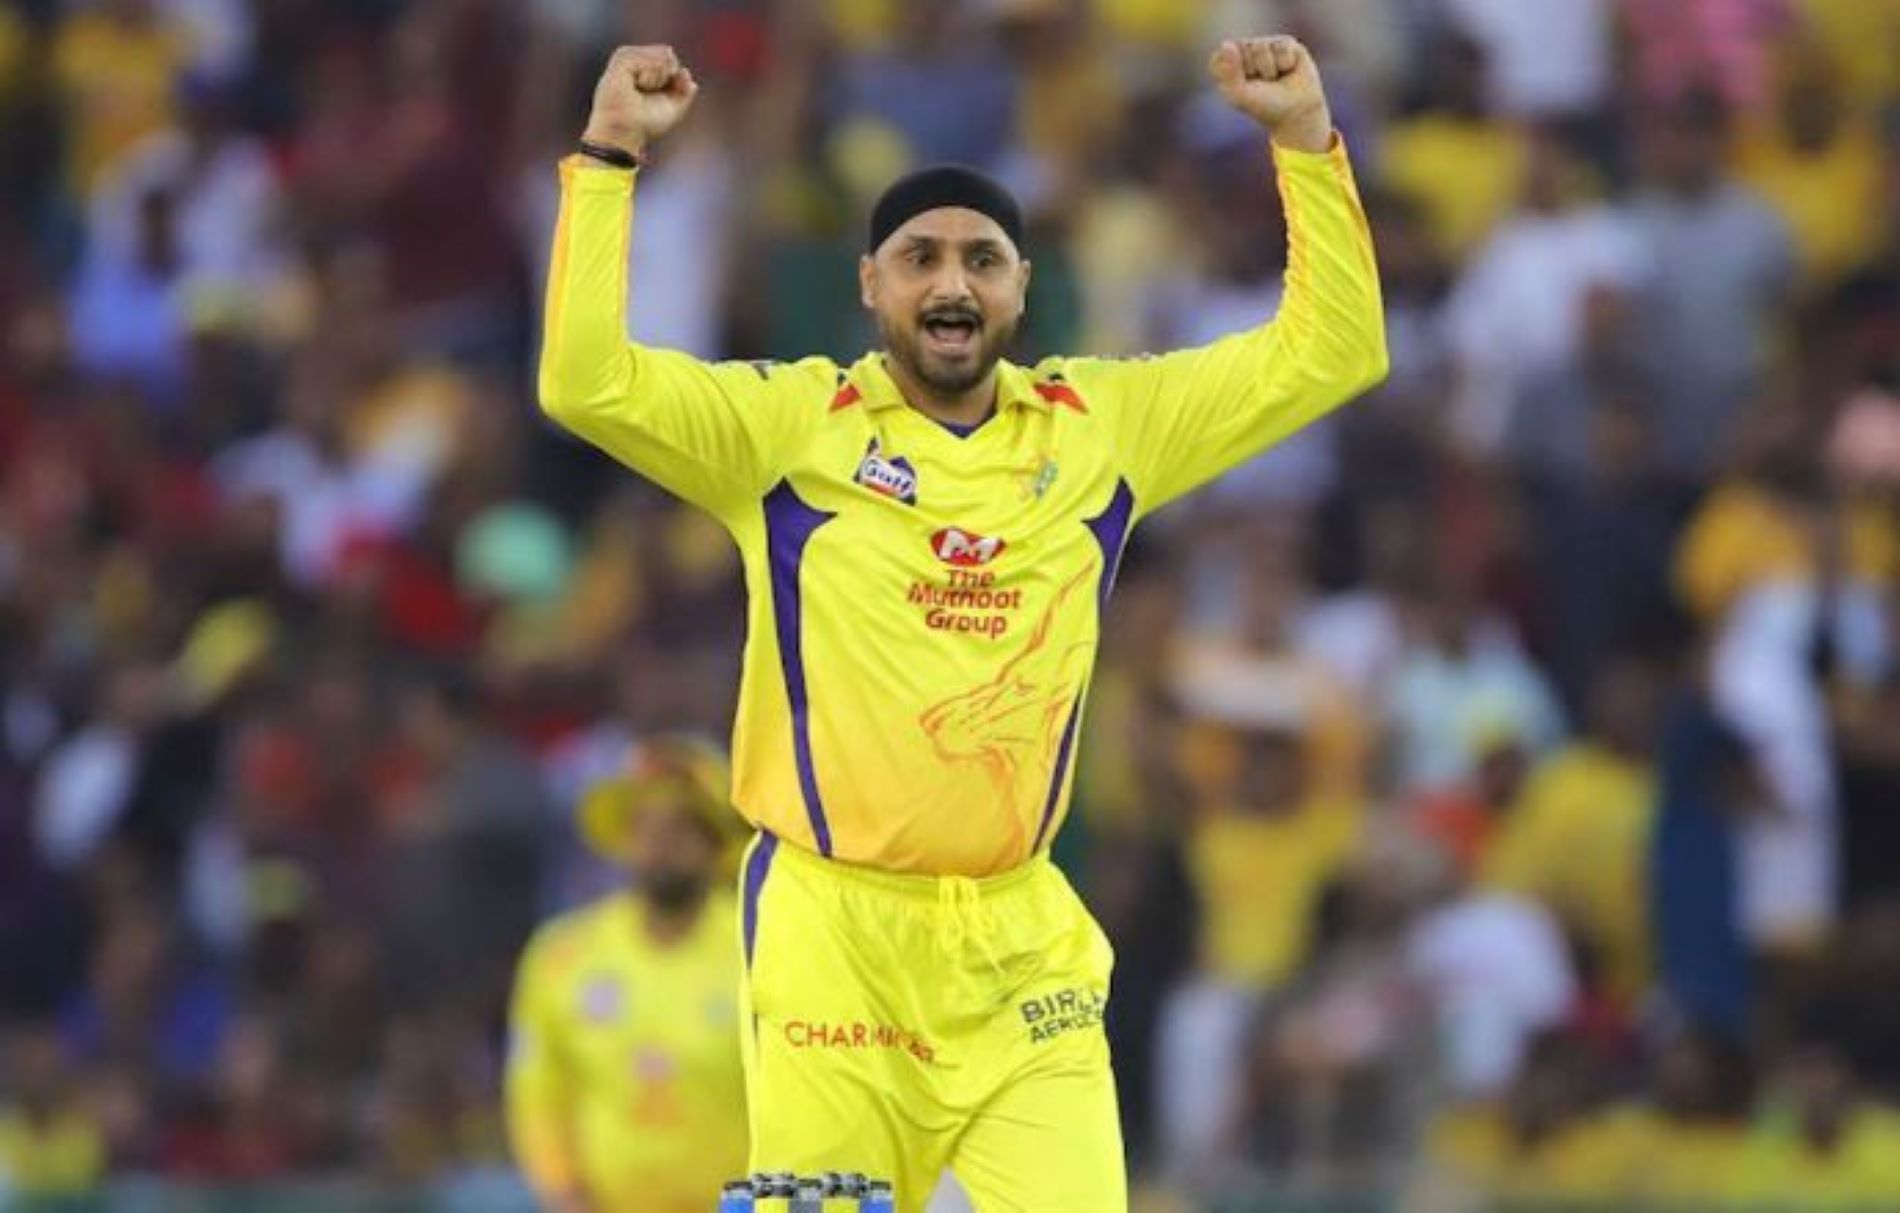 Harbhajan Singh won his final IPL title with CSK in 2018.